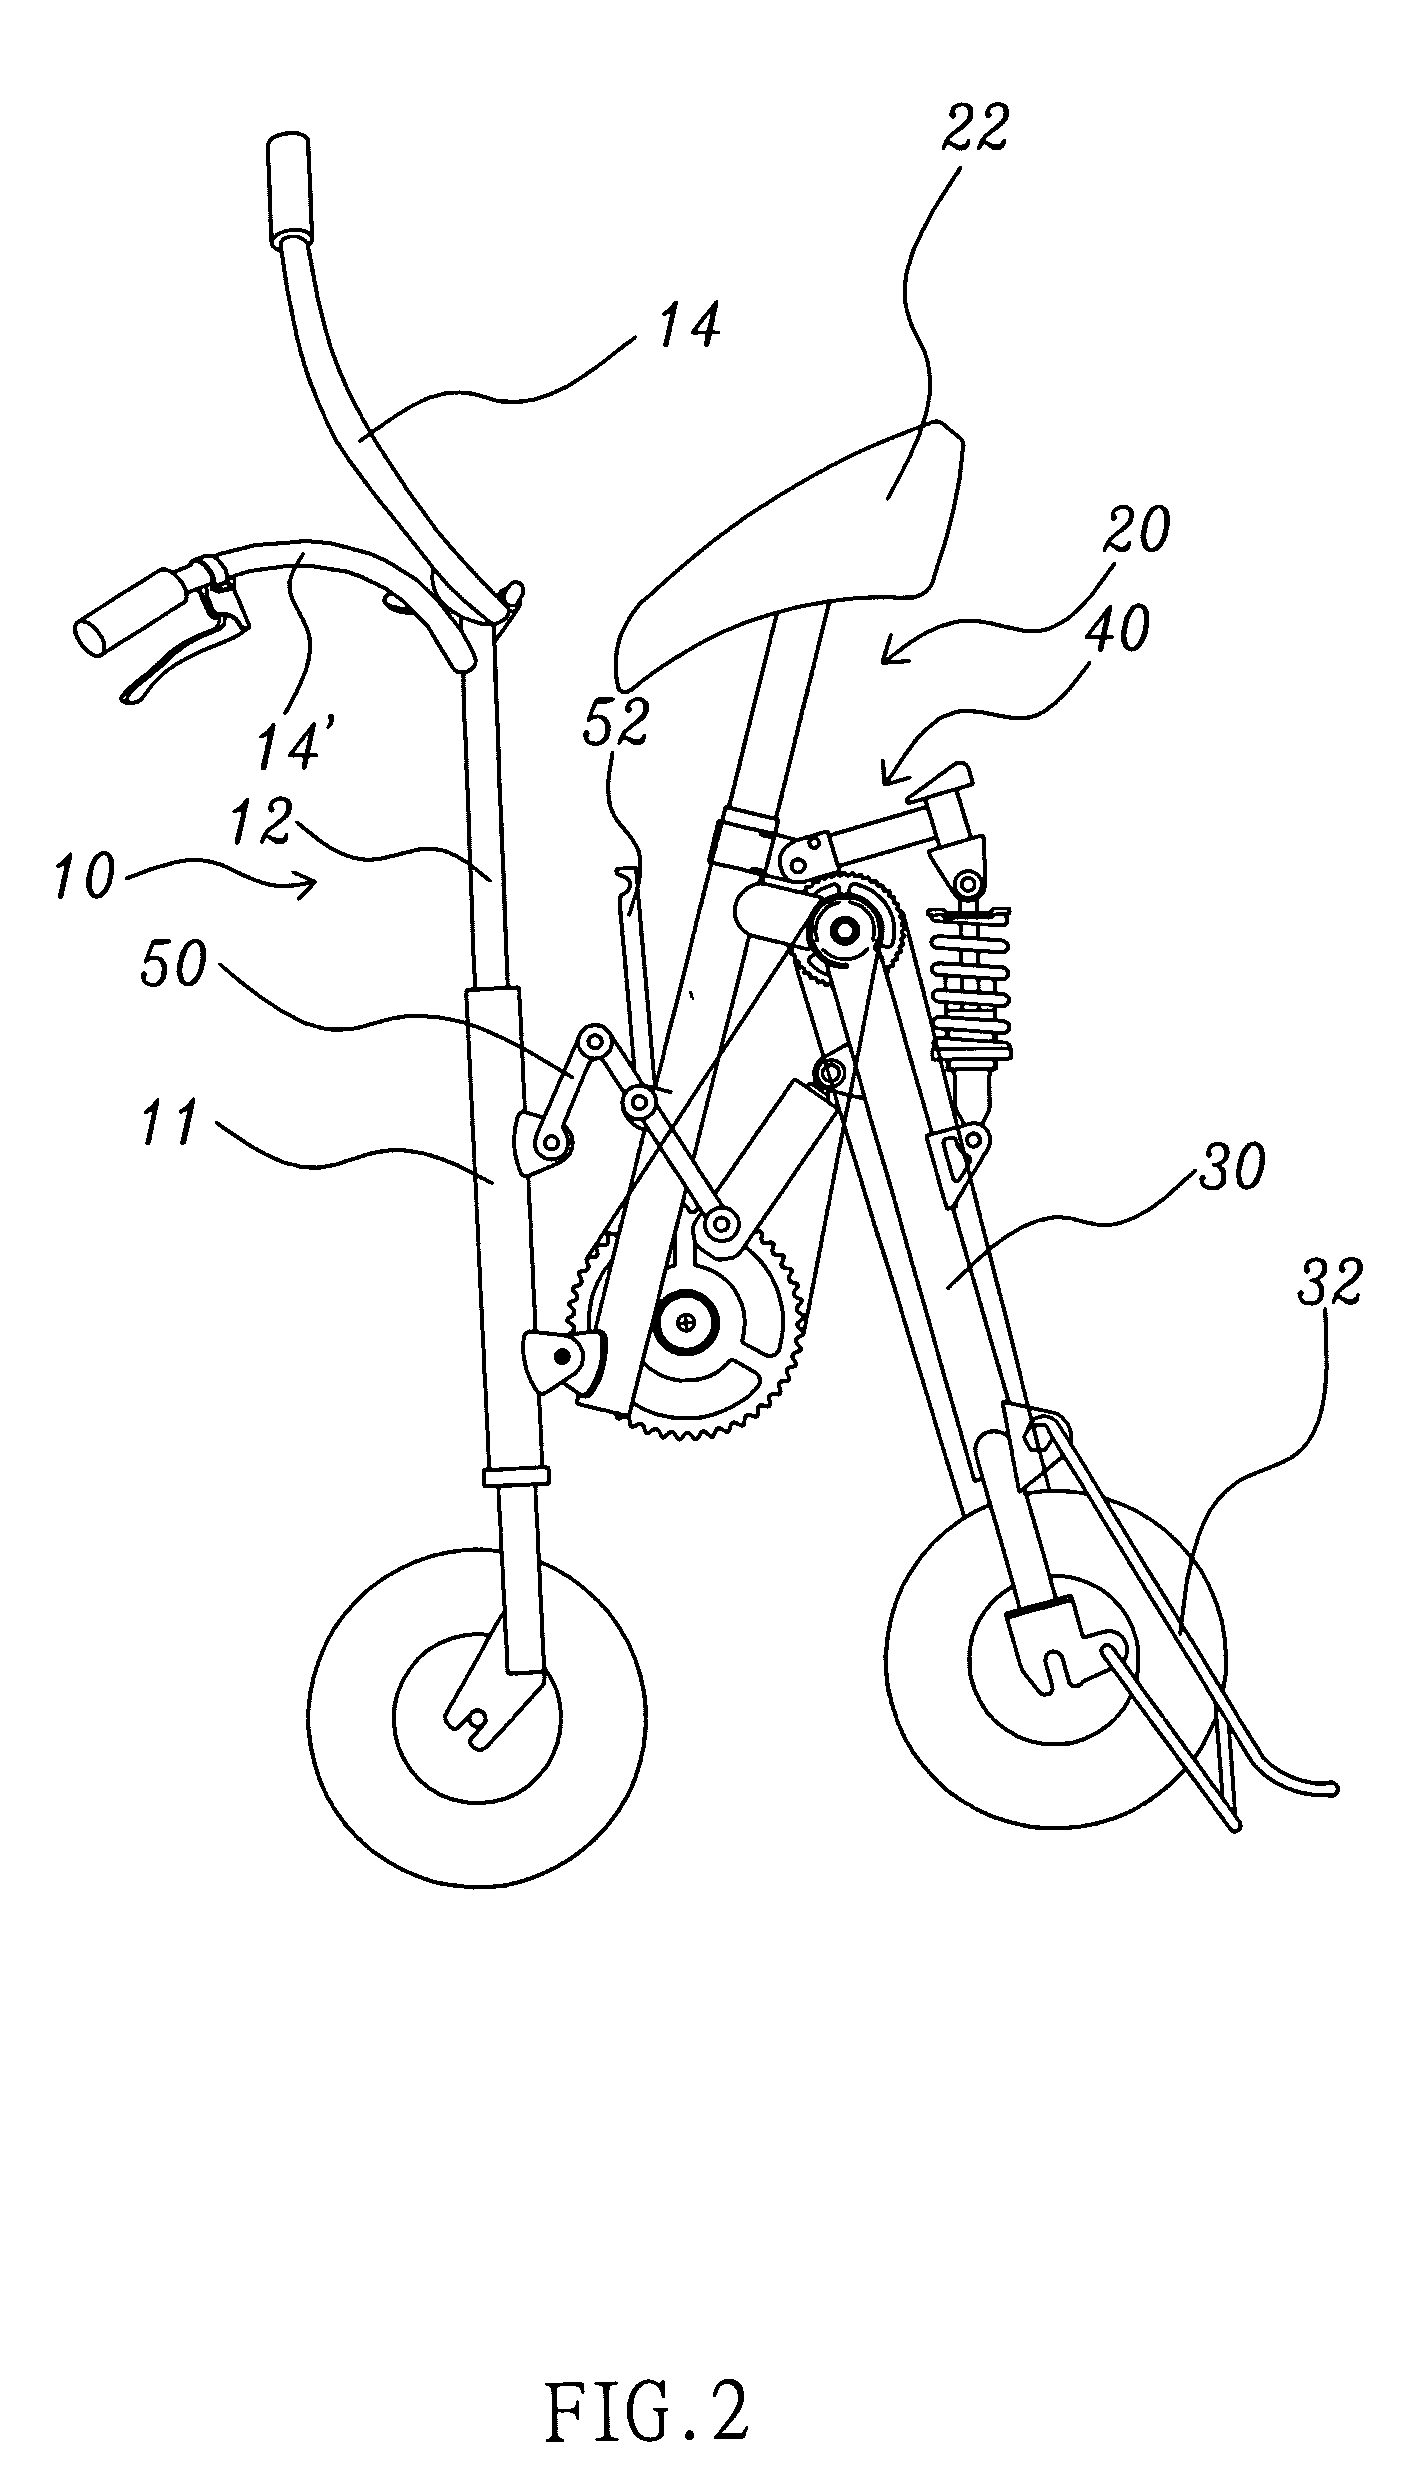 Folding bicycle structure